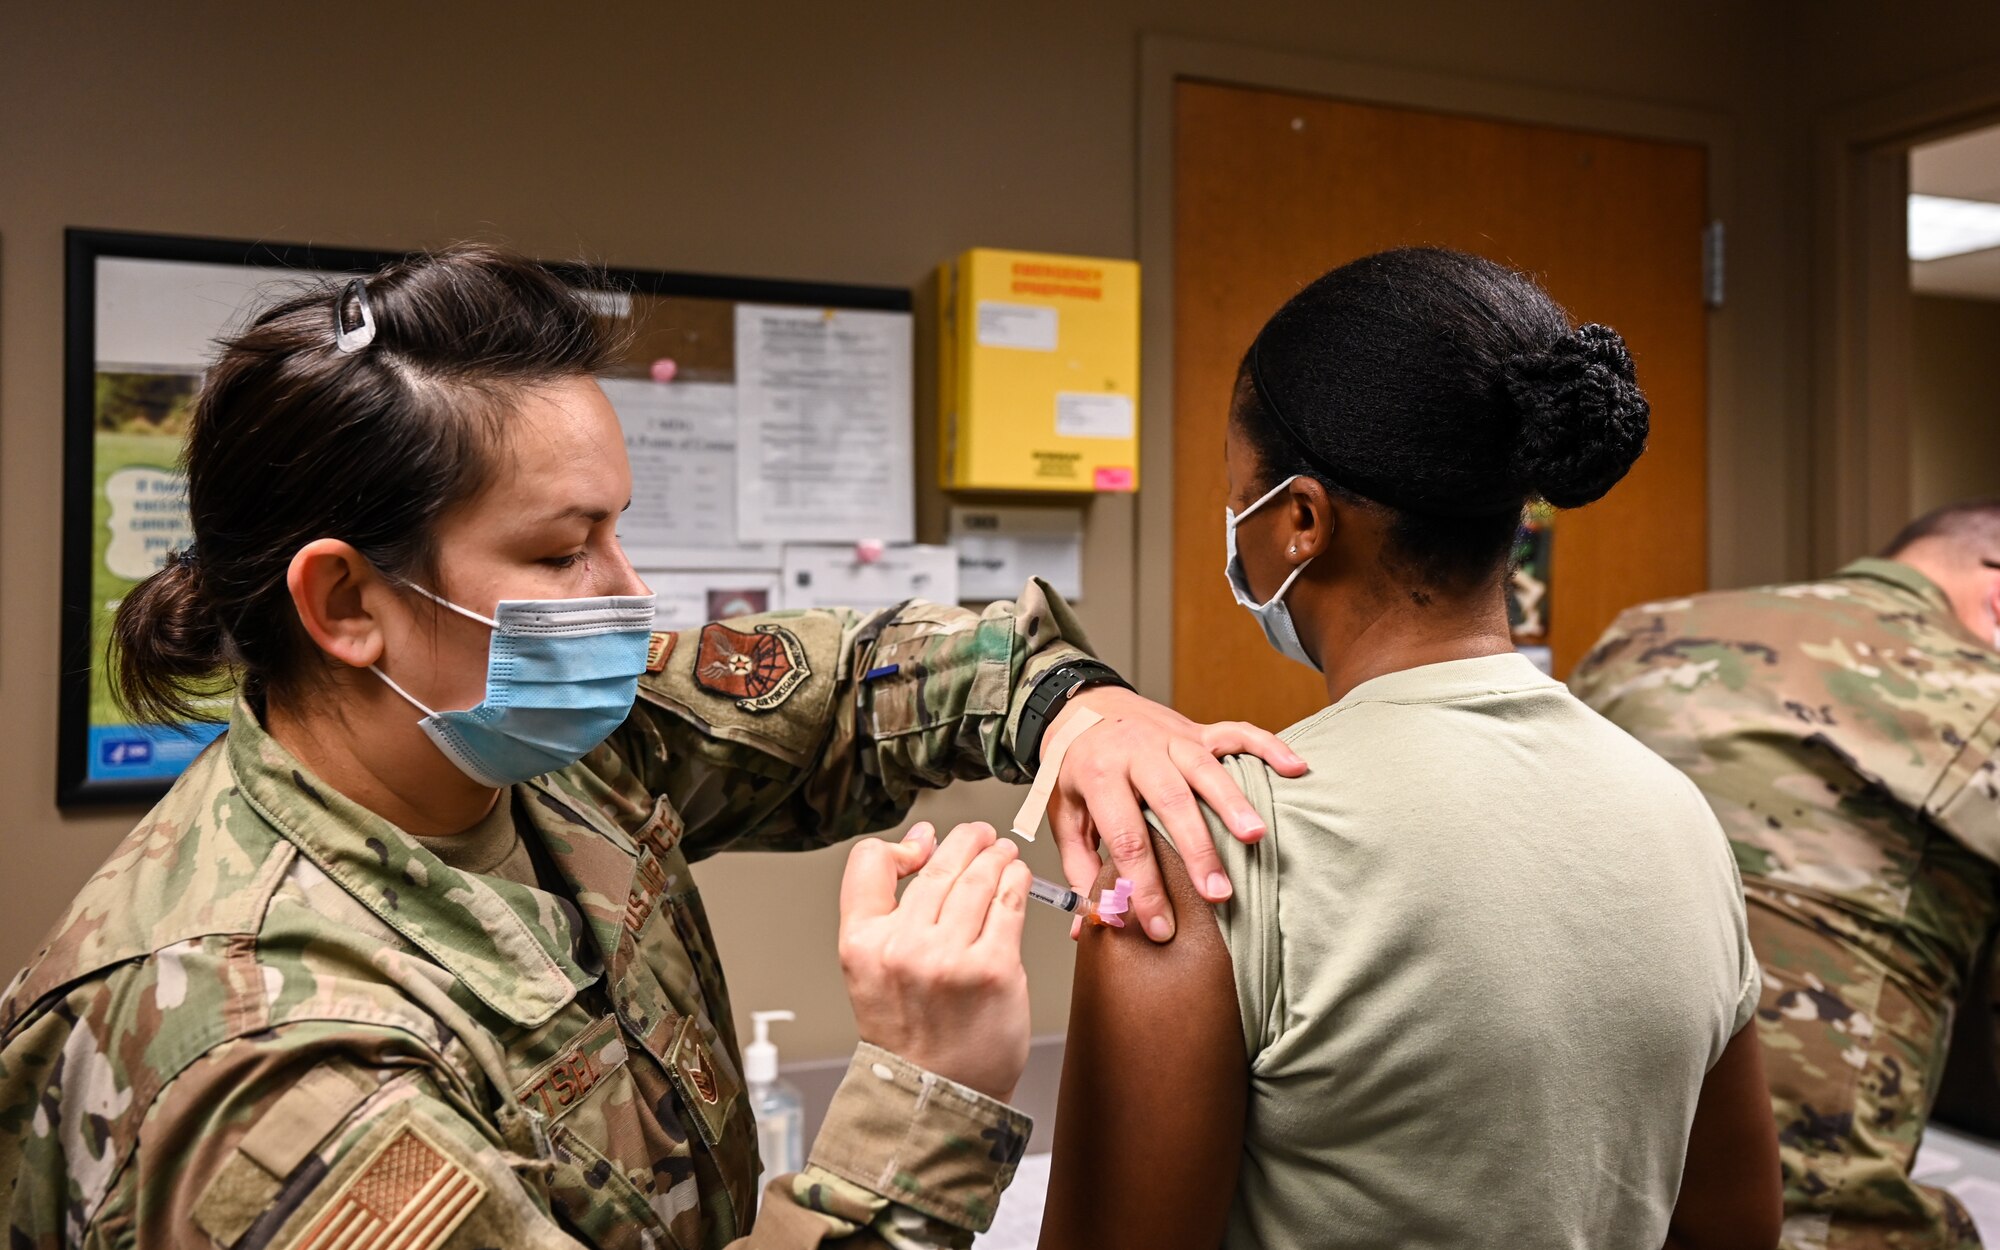 Airmen from the 2nd Medical Group receive the first doses of the COVID-19 vaccination at Barksdale Air Force Base, La., Jan. 6, 2021. The distribution of the COVID-19 vaccine is phase driven to safely protect Department of Defense personnel from COVID-19 as quickly as possible. (U.S. Air Force photo by Senior Airman Christina Graves)